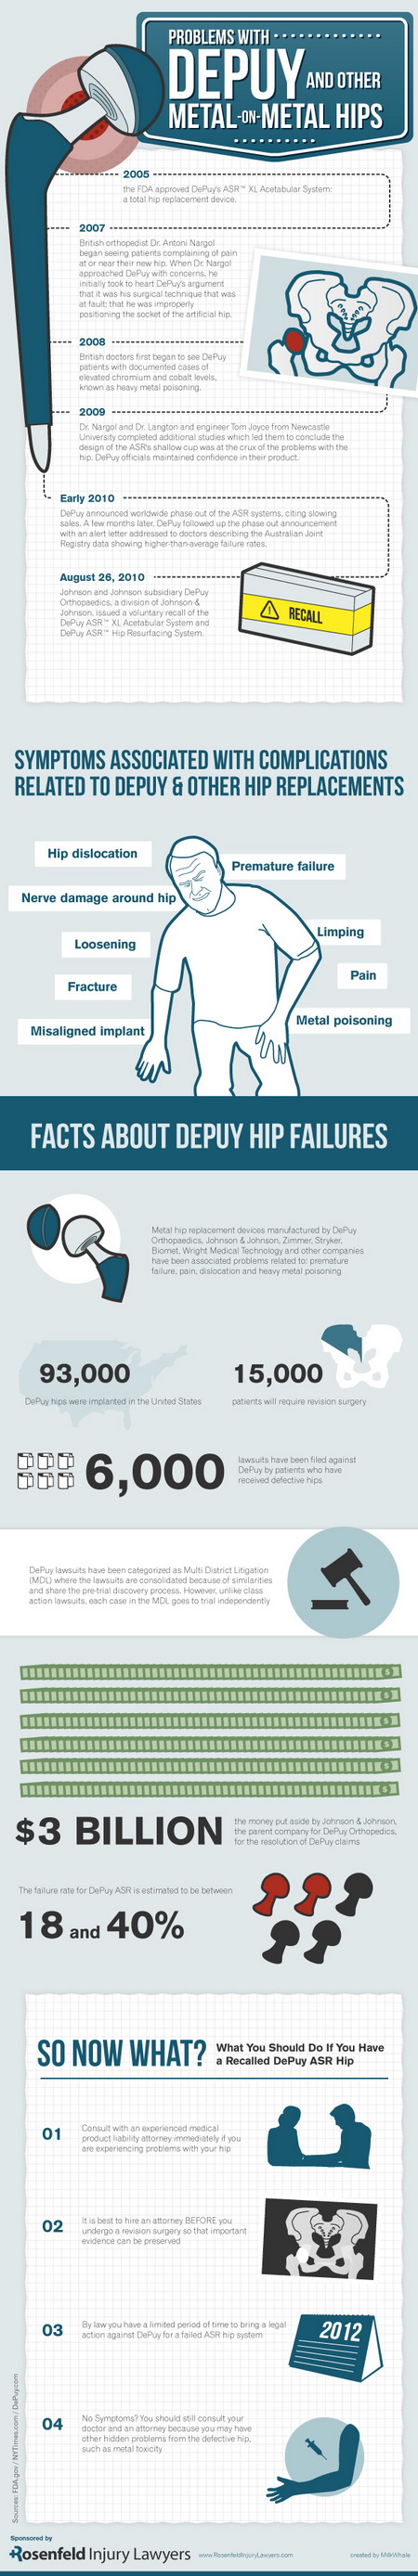 Thumbnail for Problems with Depuy Infographic